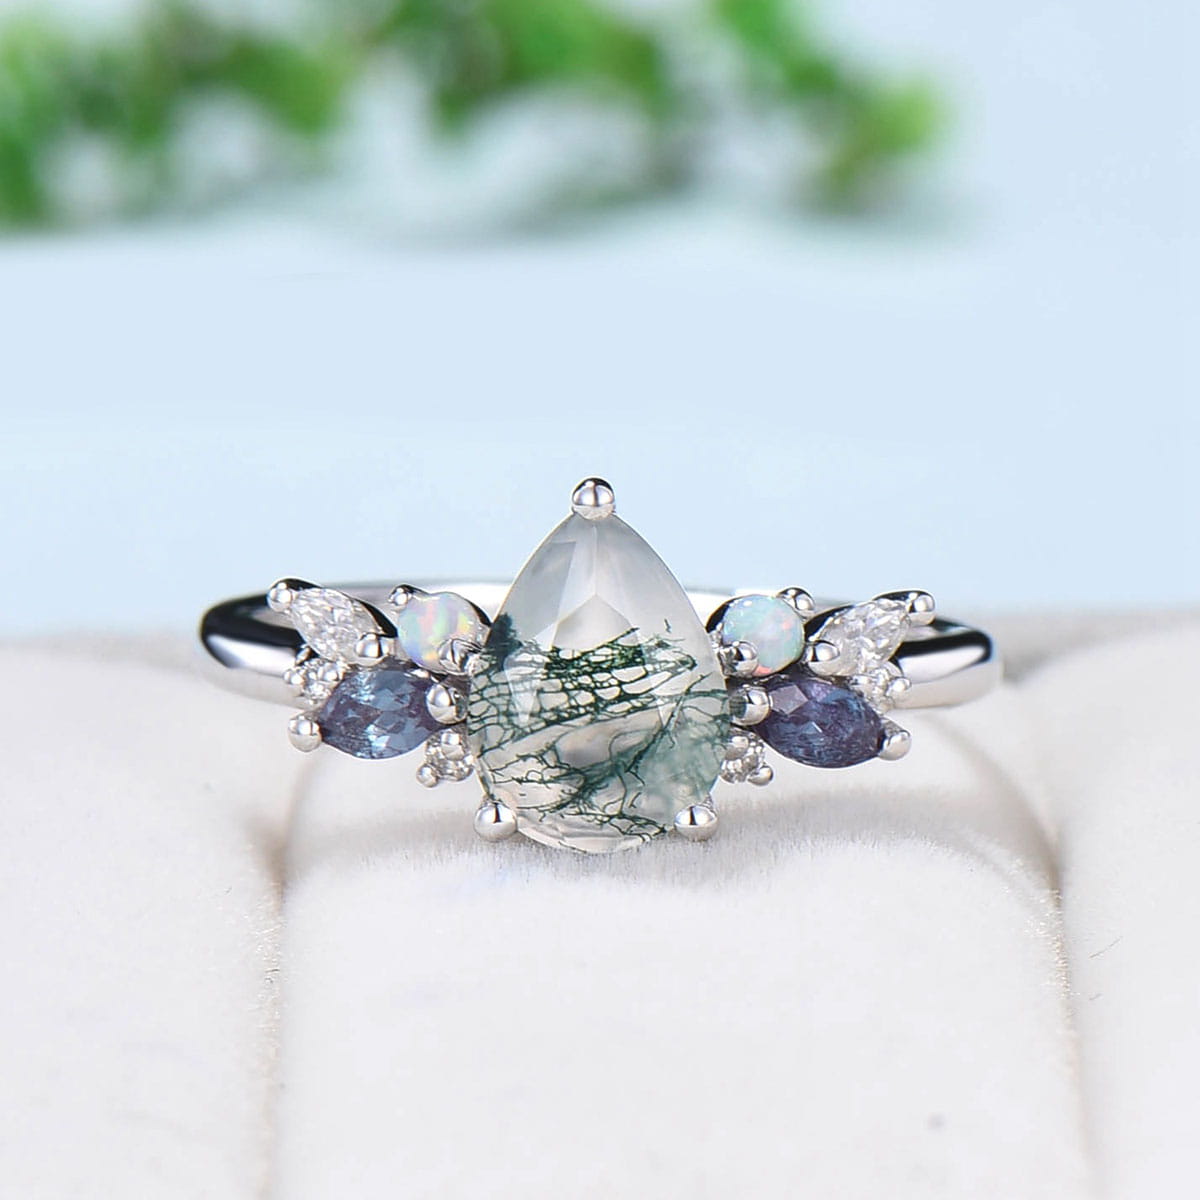 Teardrop Aquatic Agate Wedding Ring Vintage Unique Moss Agate Engagement Ring Rose Gold Alternative Alexandrite Opal Wedding Ring For Women - PENFINE